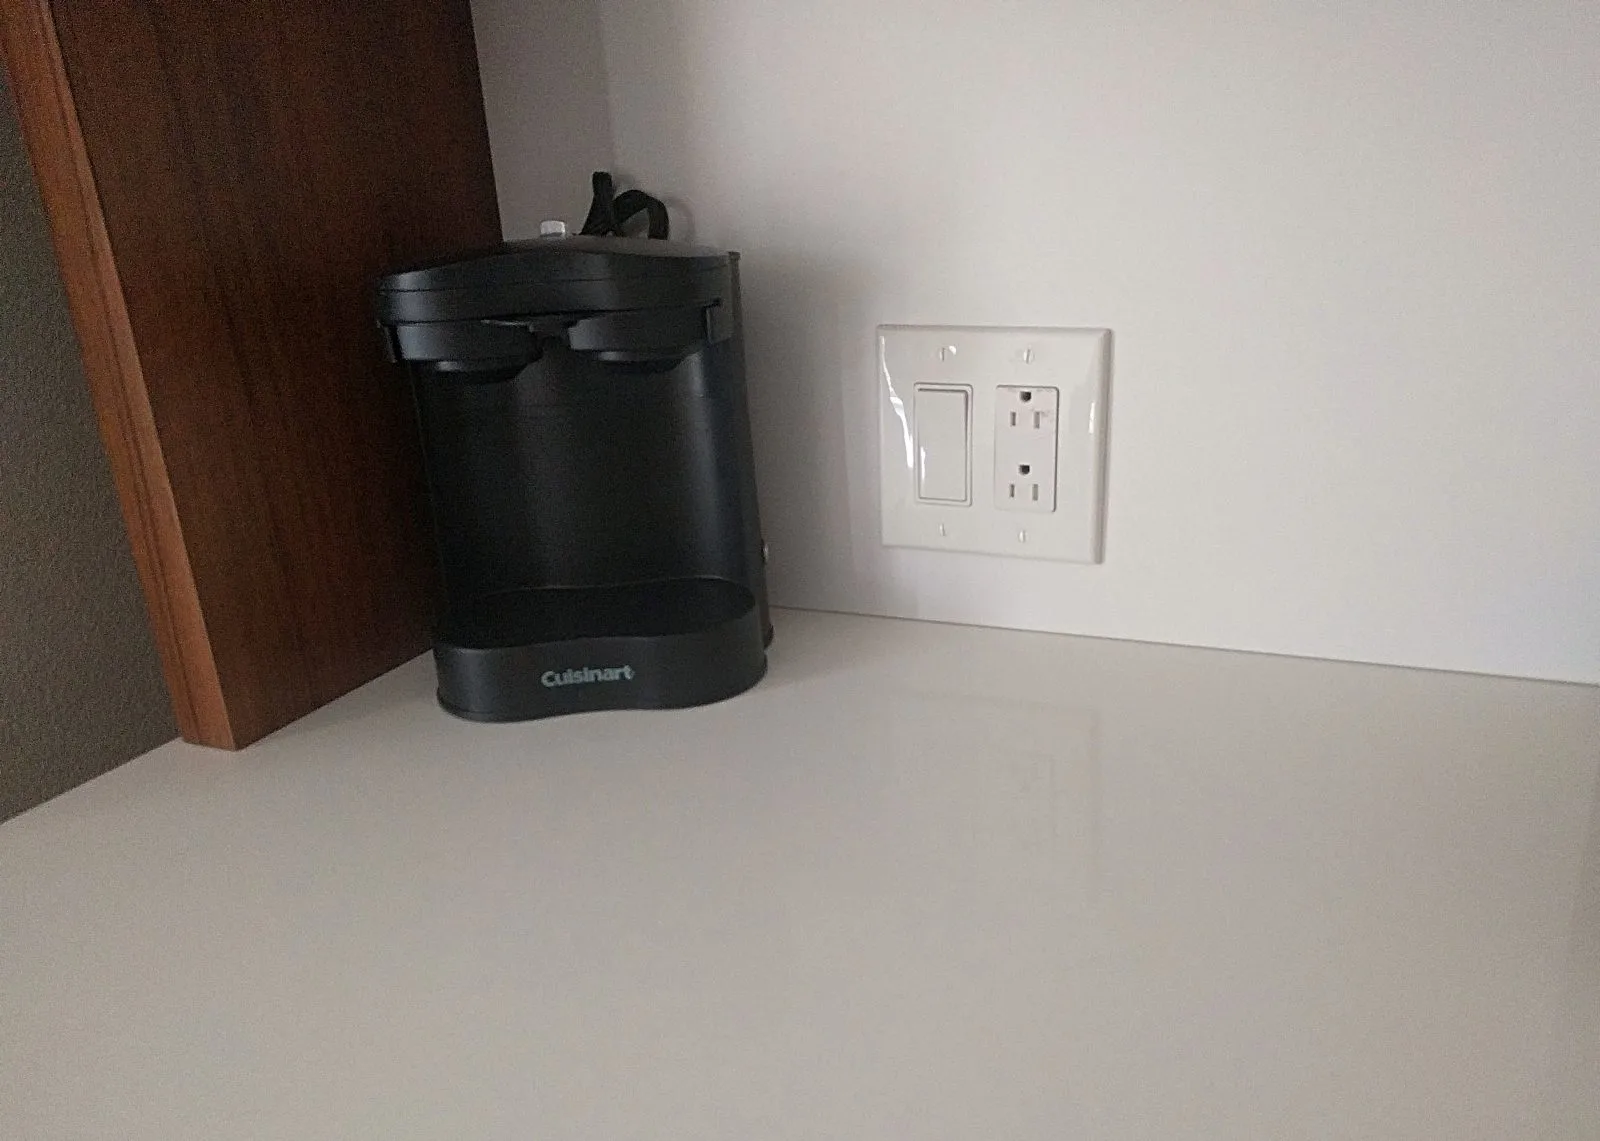 coffee maker provided in the room